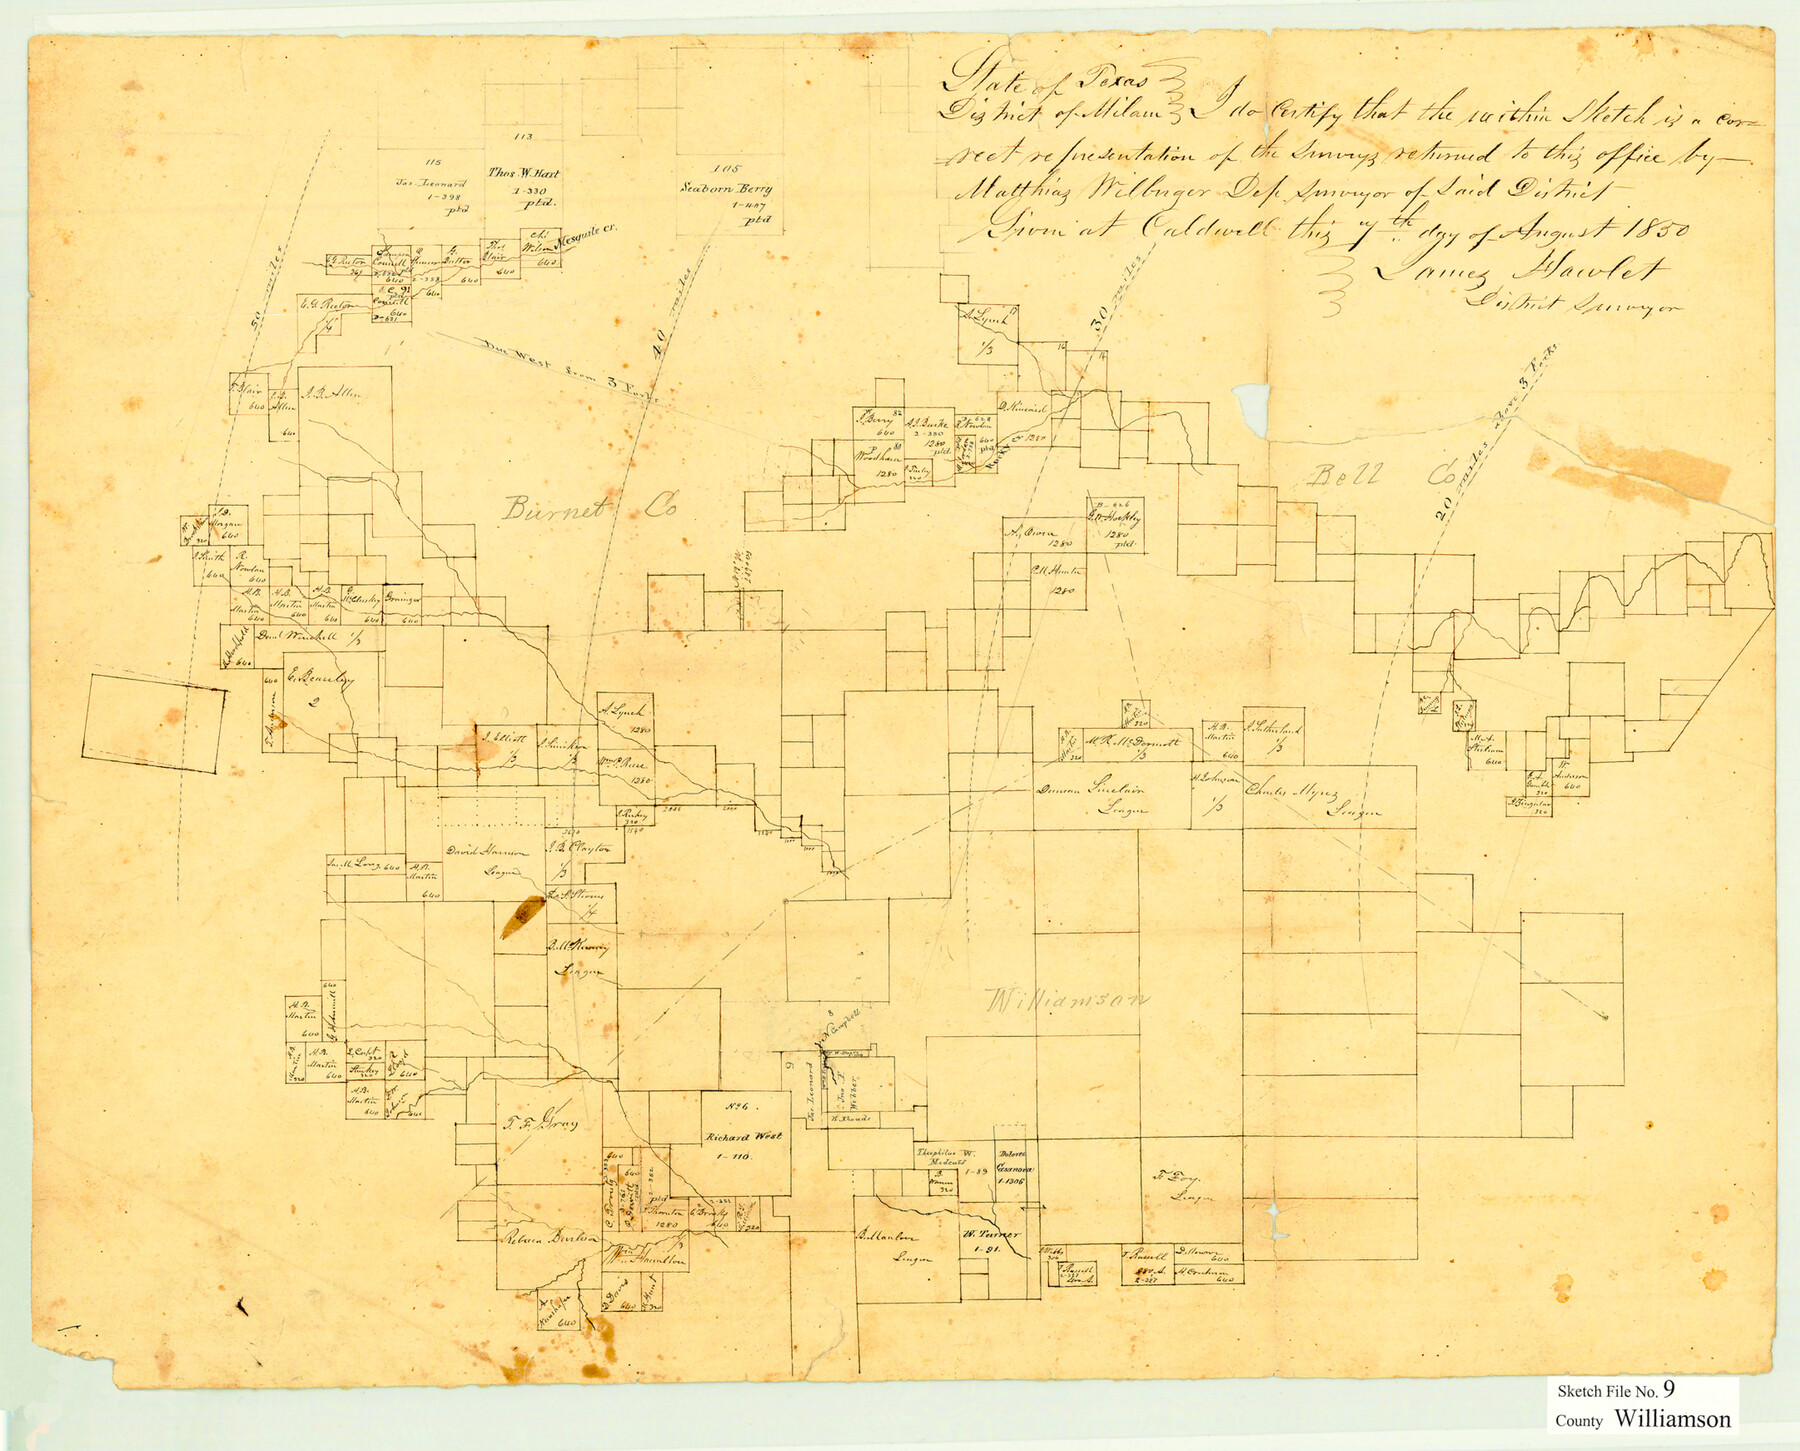 12692, Williamson County Sketch File 9, General Map Collection